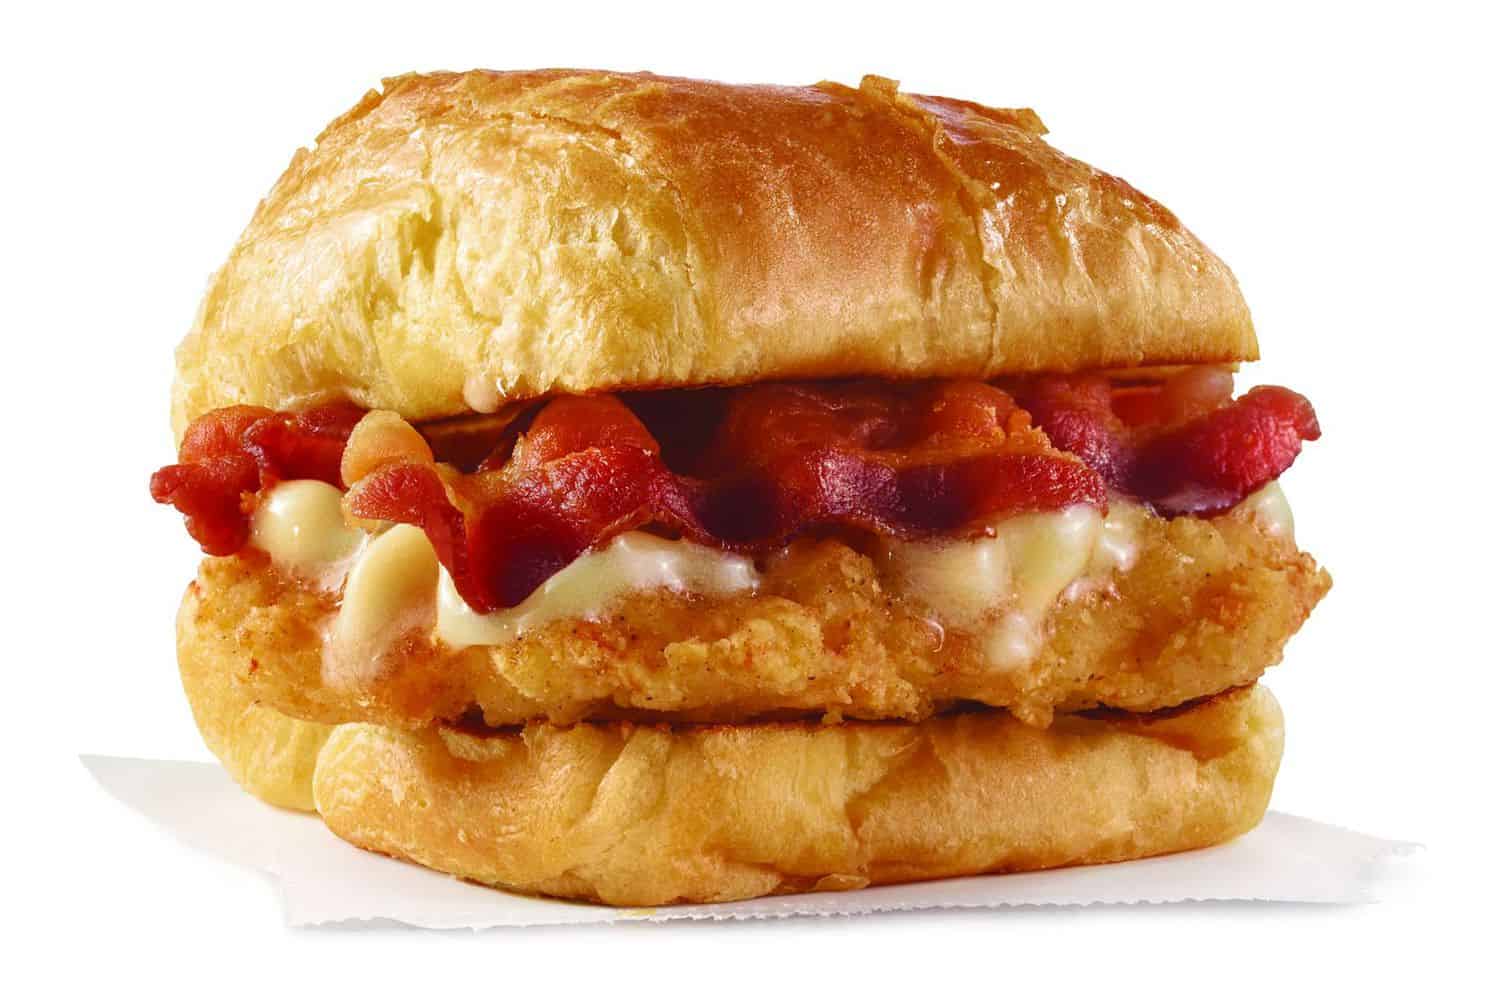 Wendys-Giving-Out-FREE-Maple-Bacon-Chicken-Croissant-Sandwiches-via-Mobile-App-Orders